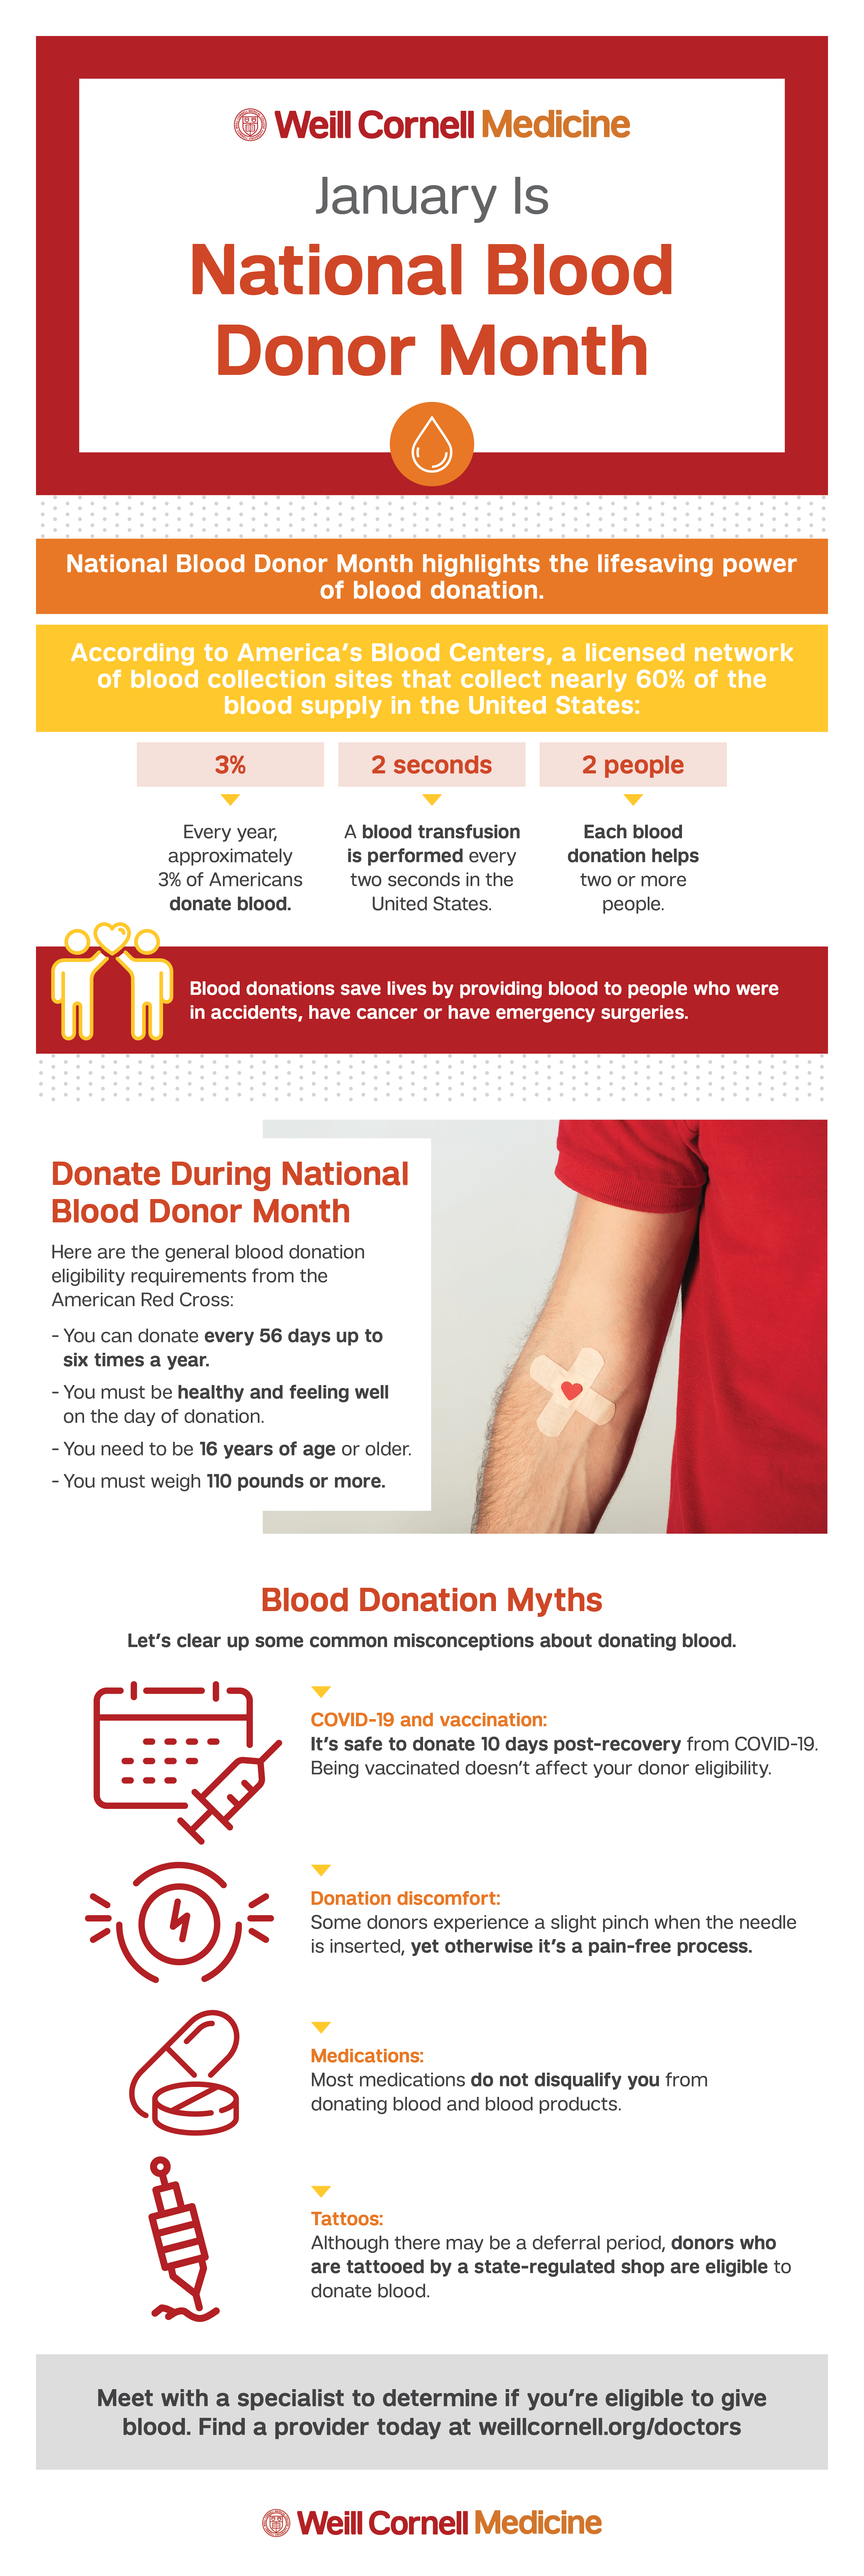 January Is National Blood Donor Month